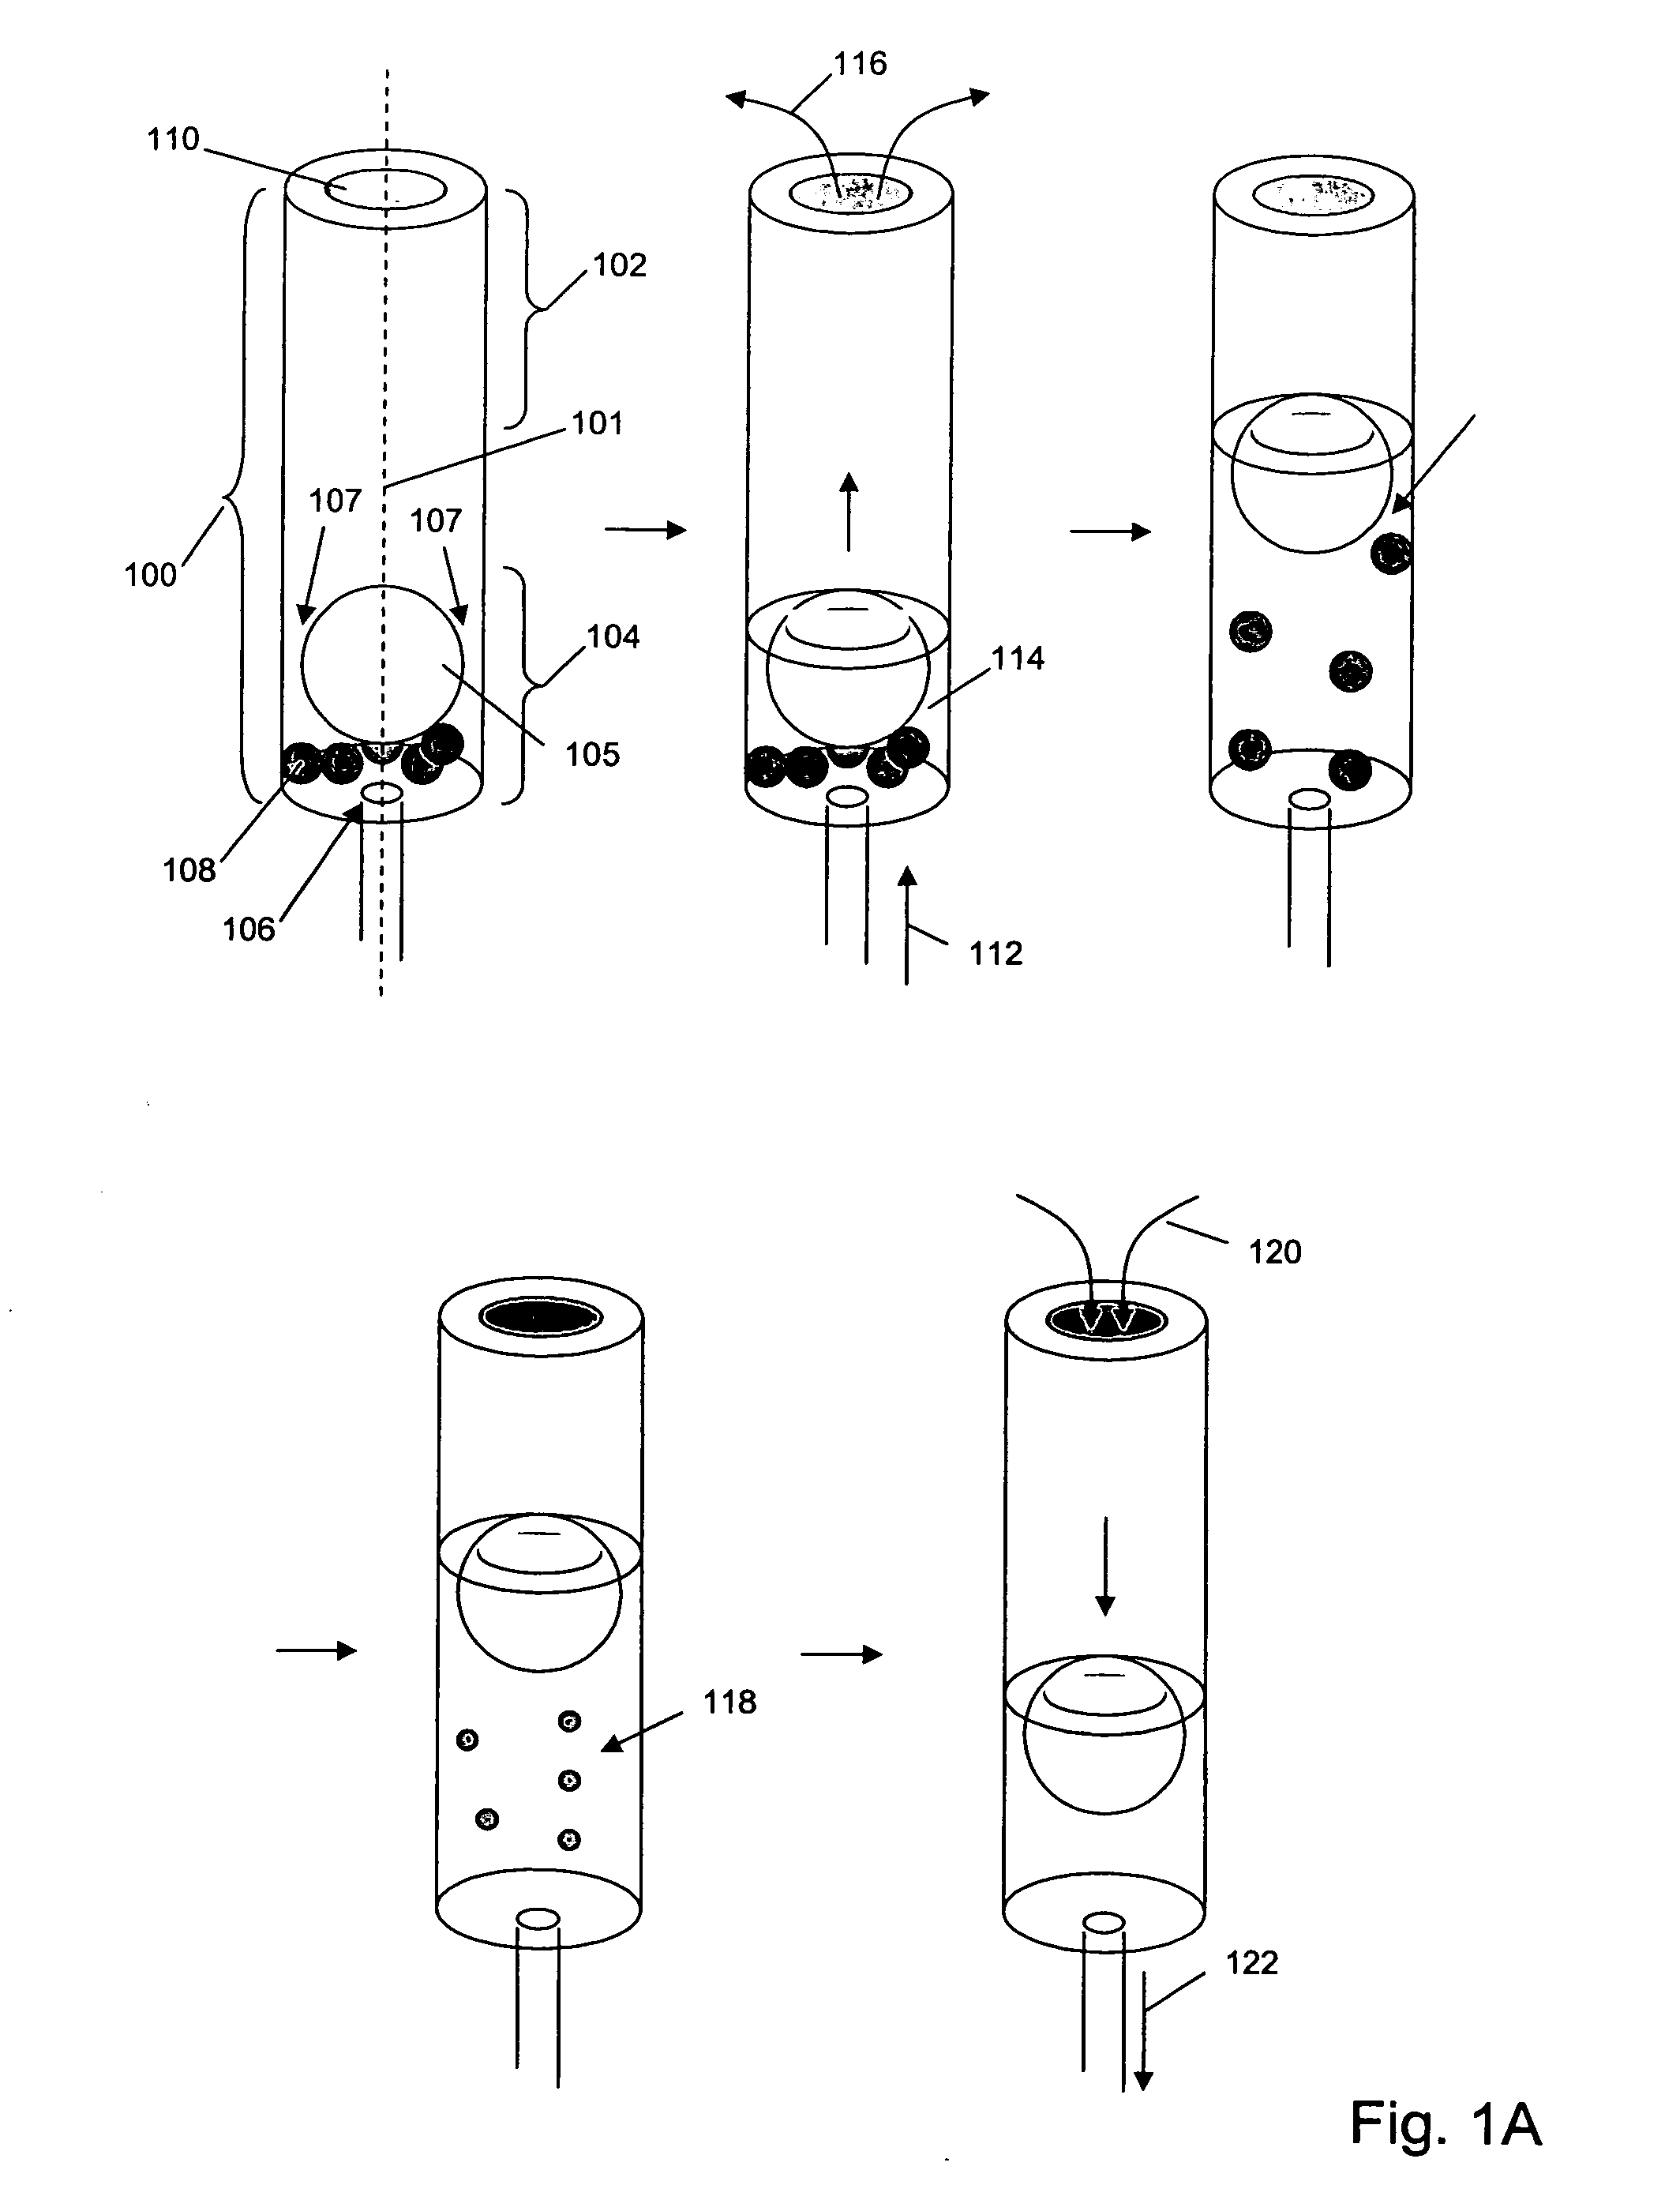 Reagent reservoir system for analytical instruments